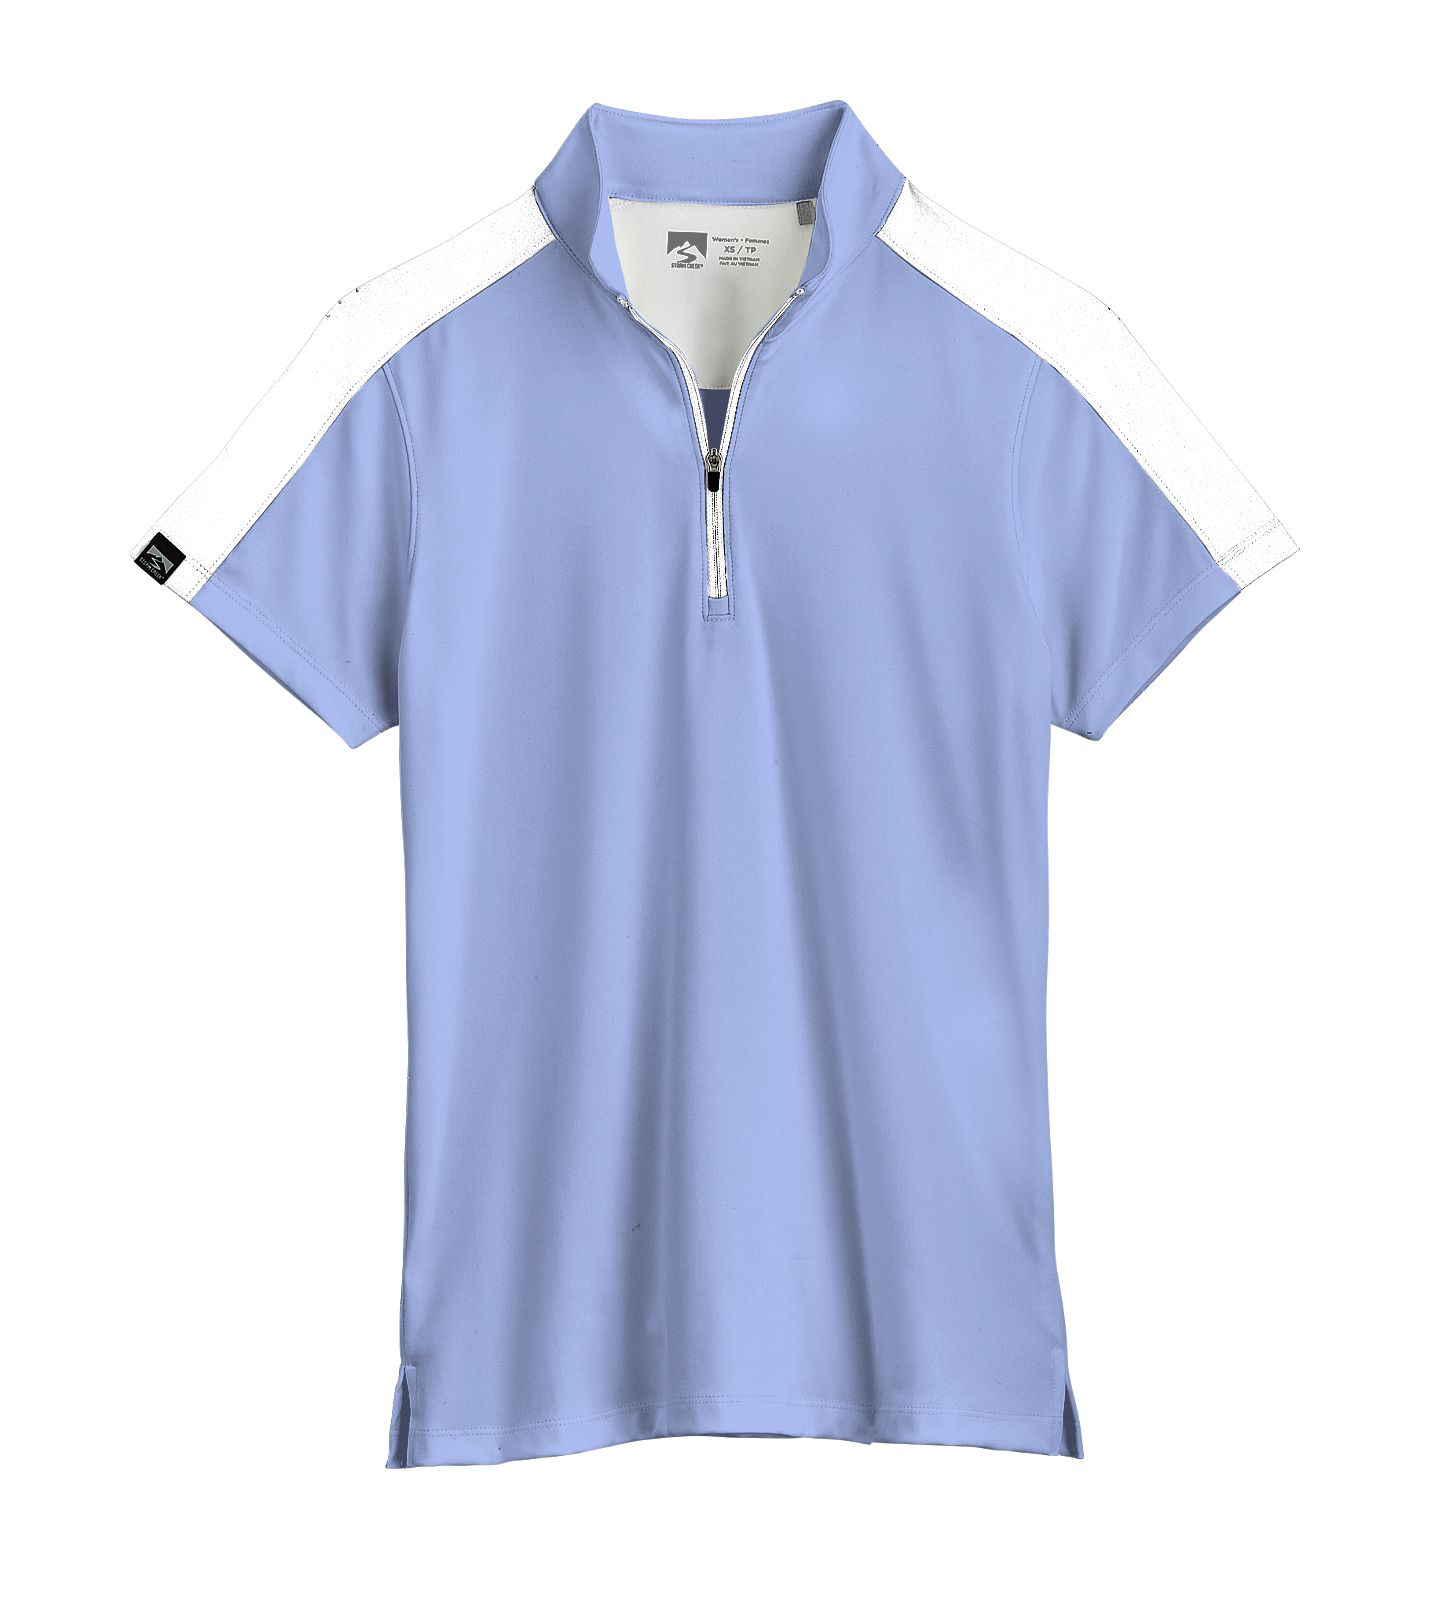 Storm Creek Activator Short-Sleeve Polo Shirt for Ladies - Peri Blue/White - 2XL